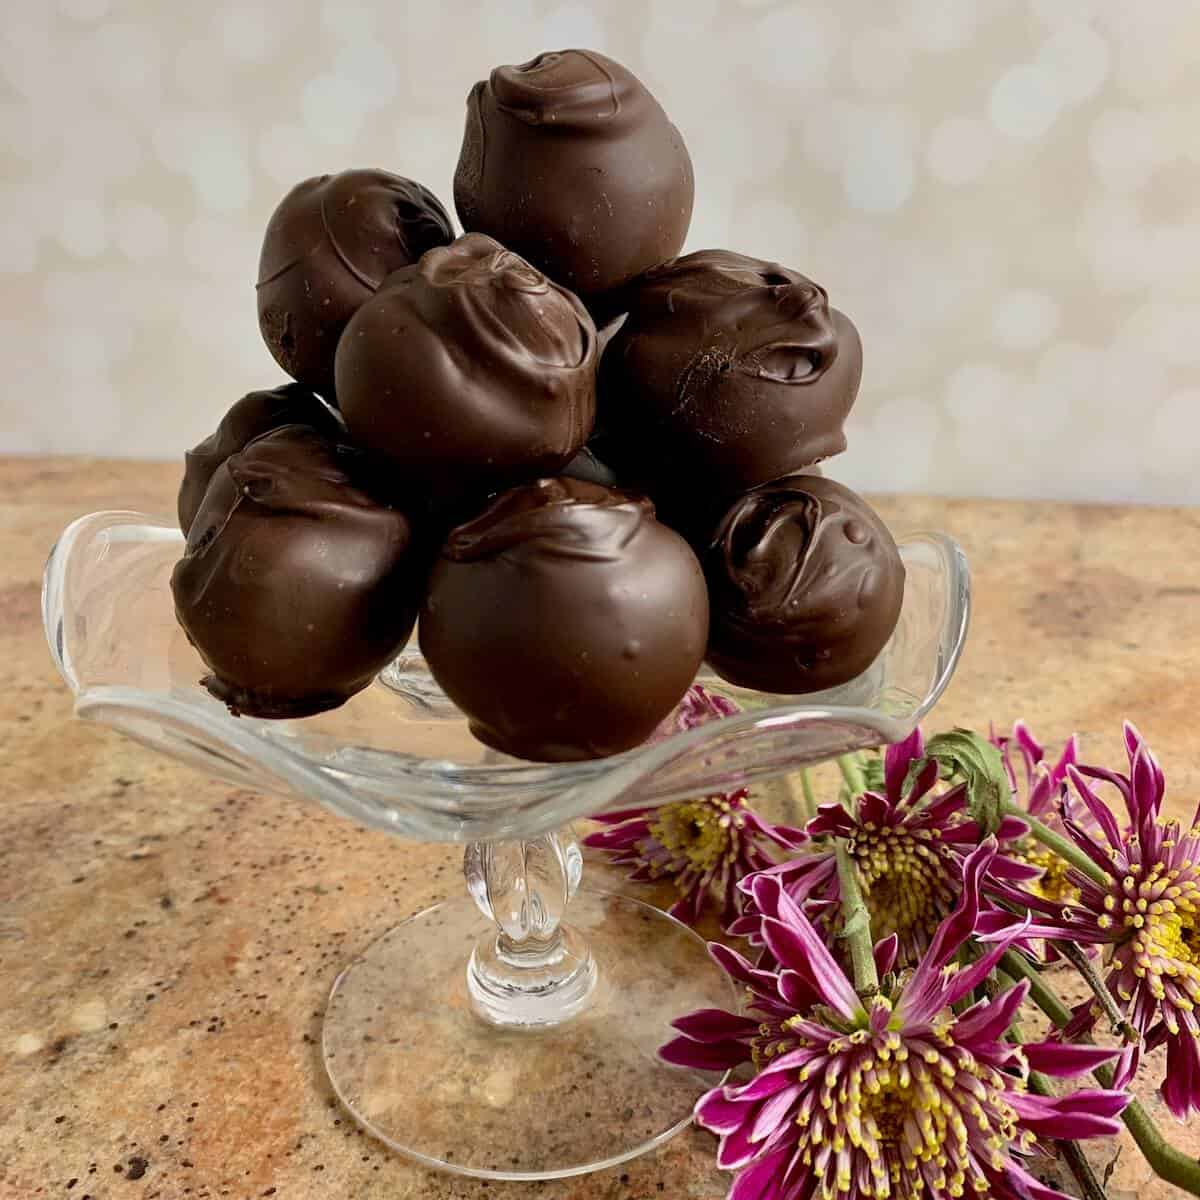 Chocolate cake truffles stacked on a glass plate stand with pink flowers below.